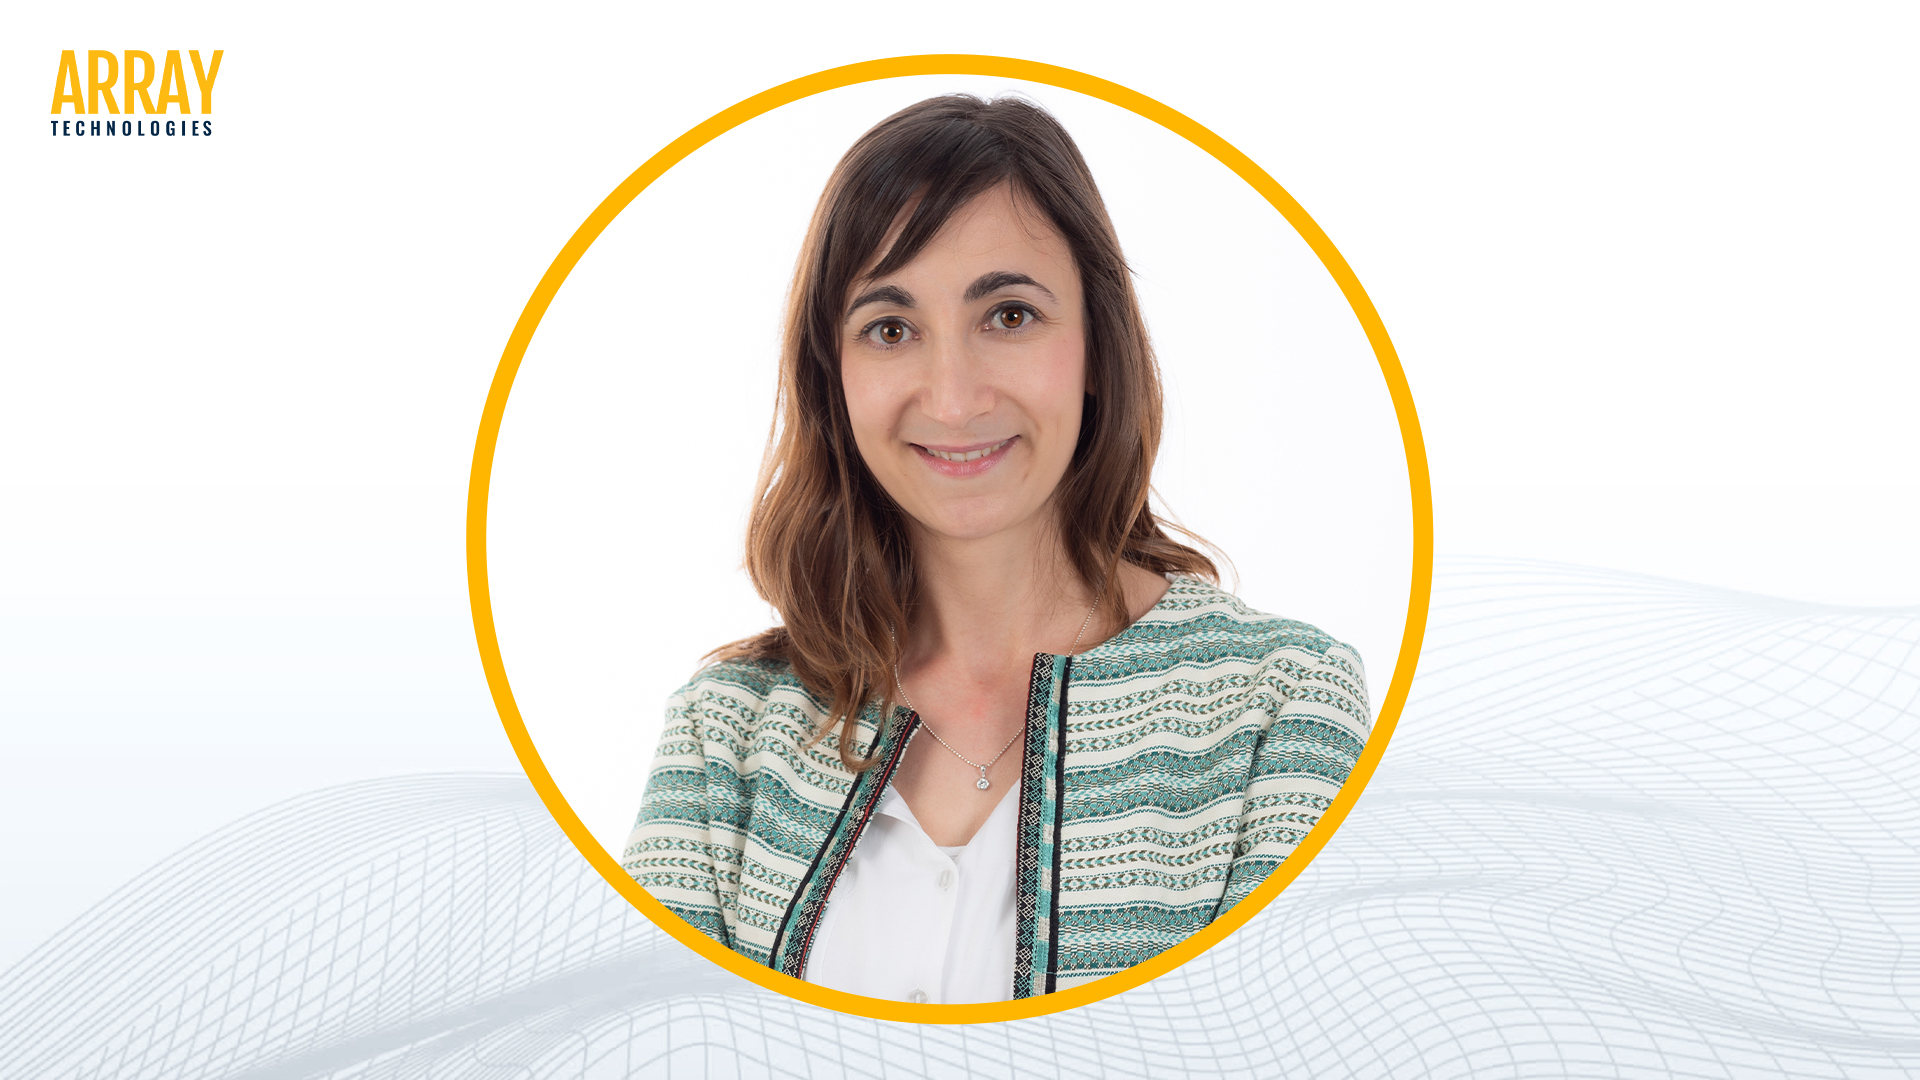 Meet Maria Barbarin, Array's proposals and contracts manager in Spain.